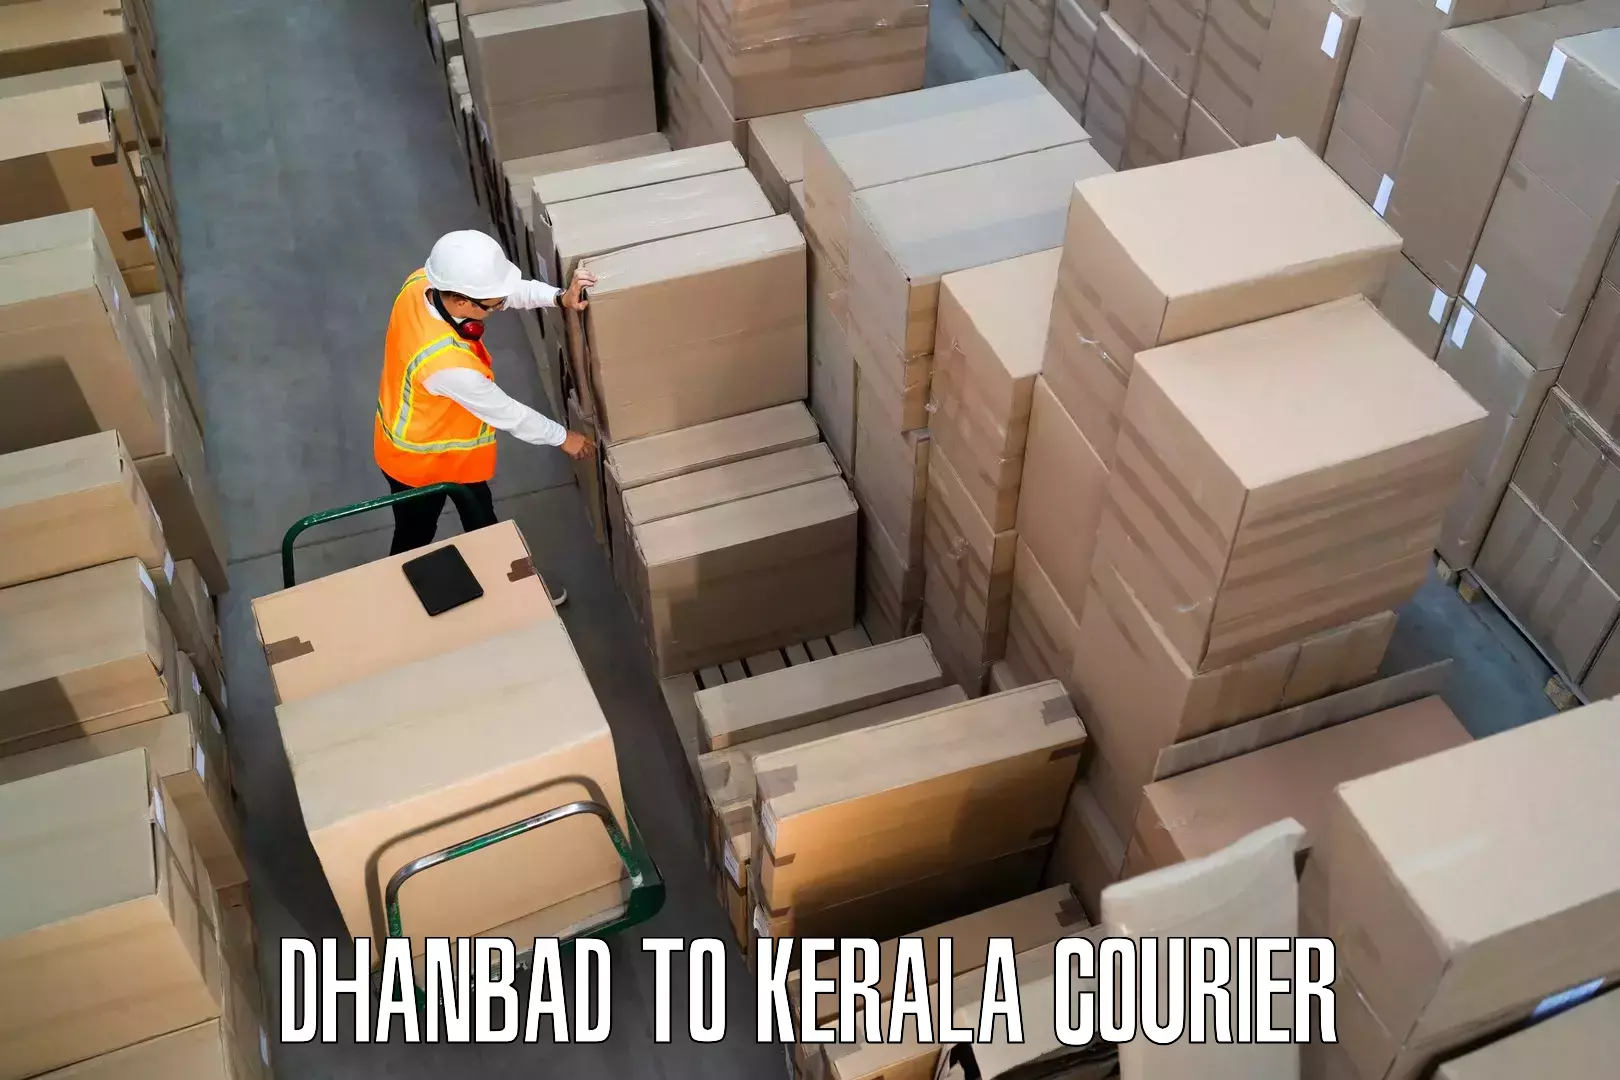 Furniture delivery service Dhanbad to Nedumangad